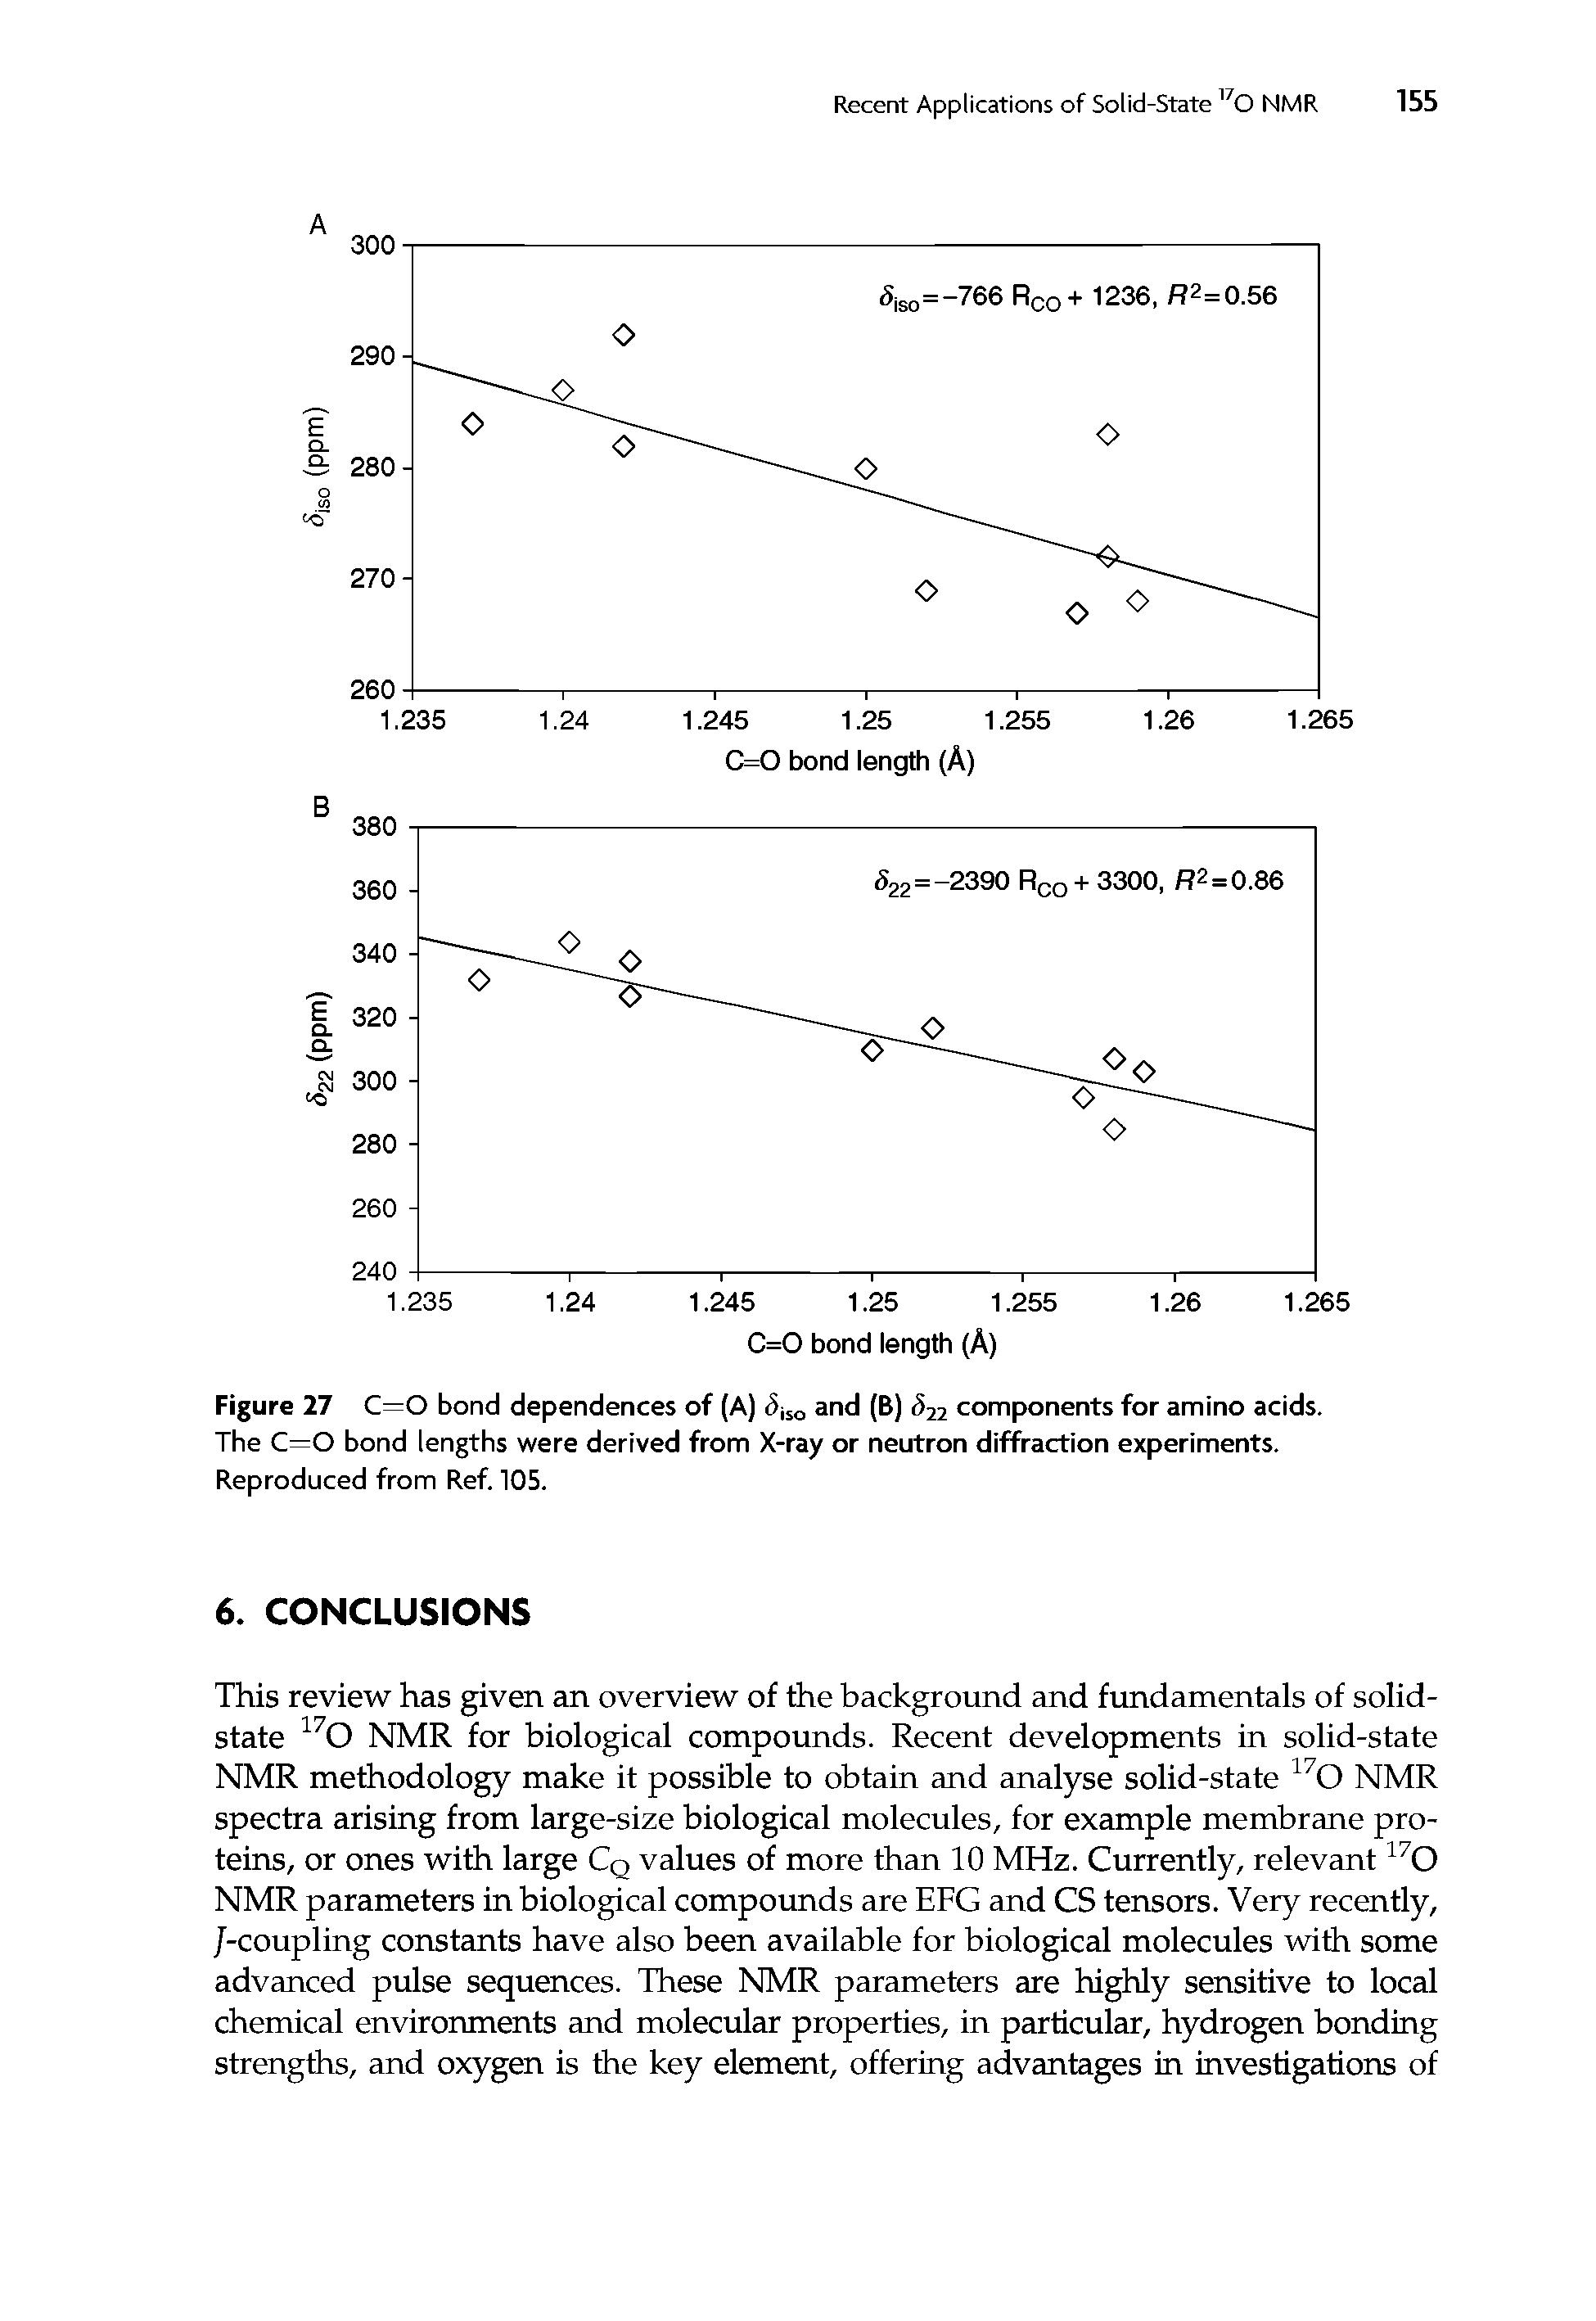 Figure 27 C—O bond dependences of (A) dlso and (B) <522 components for amino acids. The C—O bond lengths were derived from X-ray or neutron diffraction experiments. Reproduced from Ref. 105.